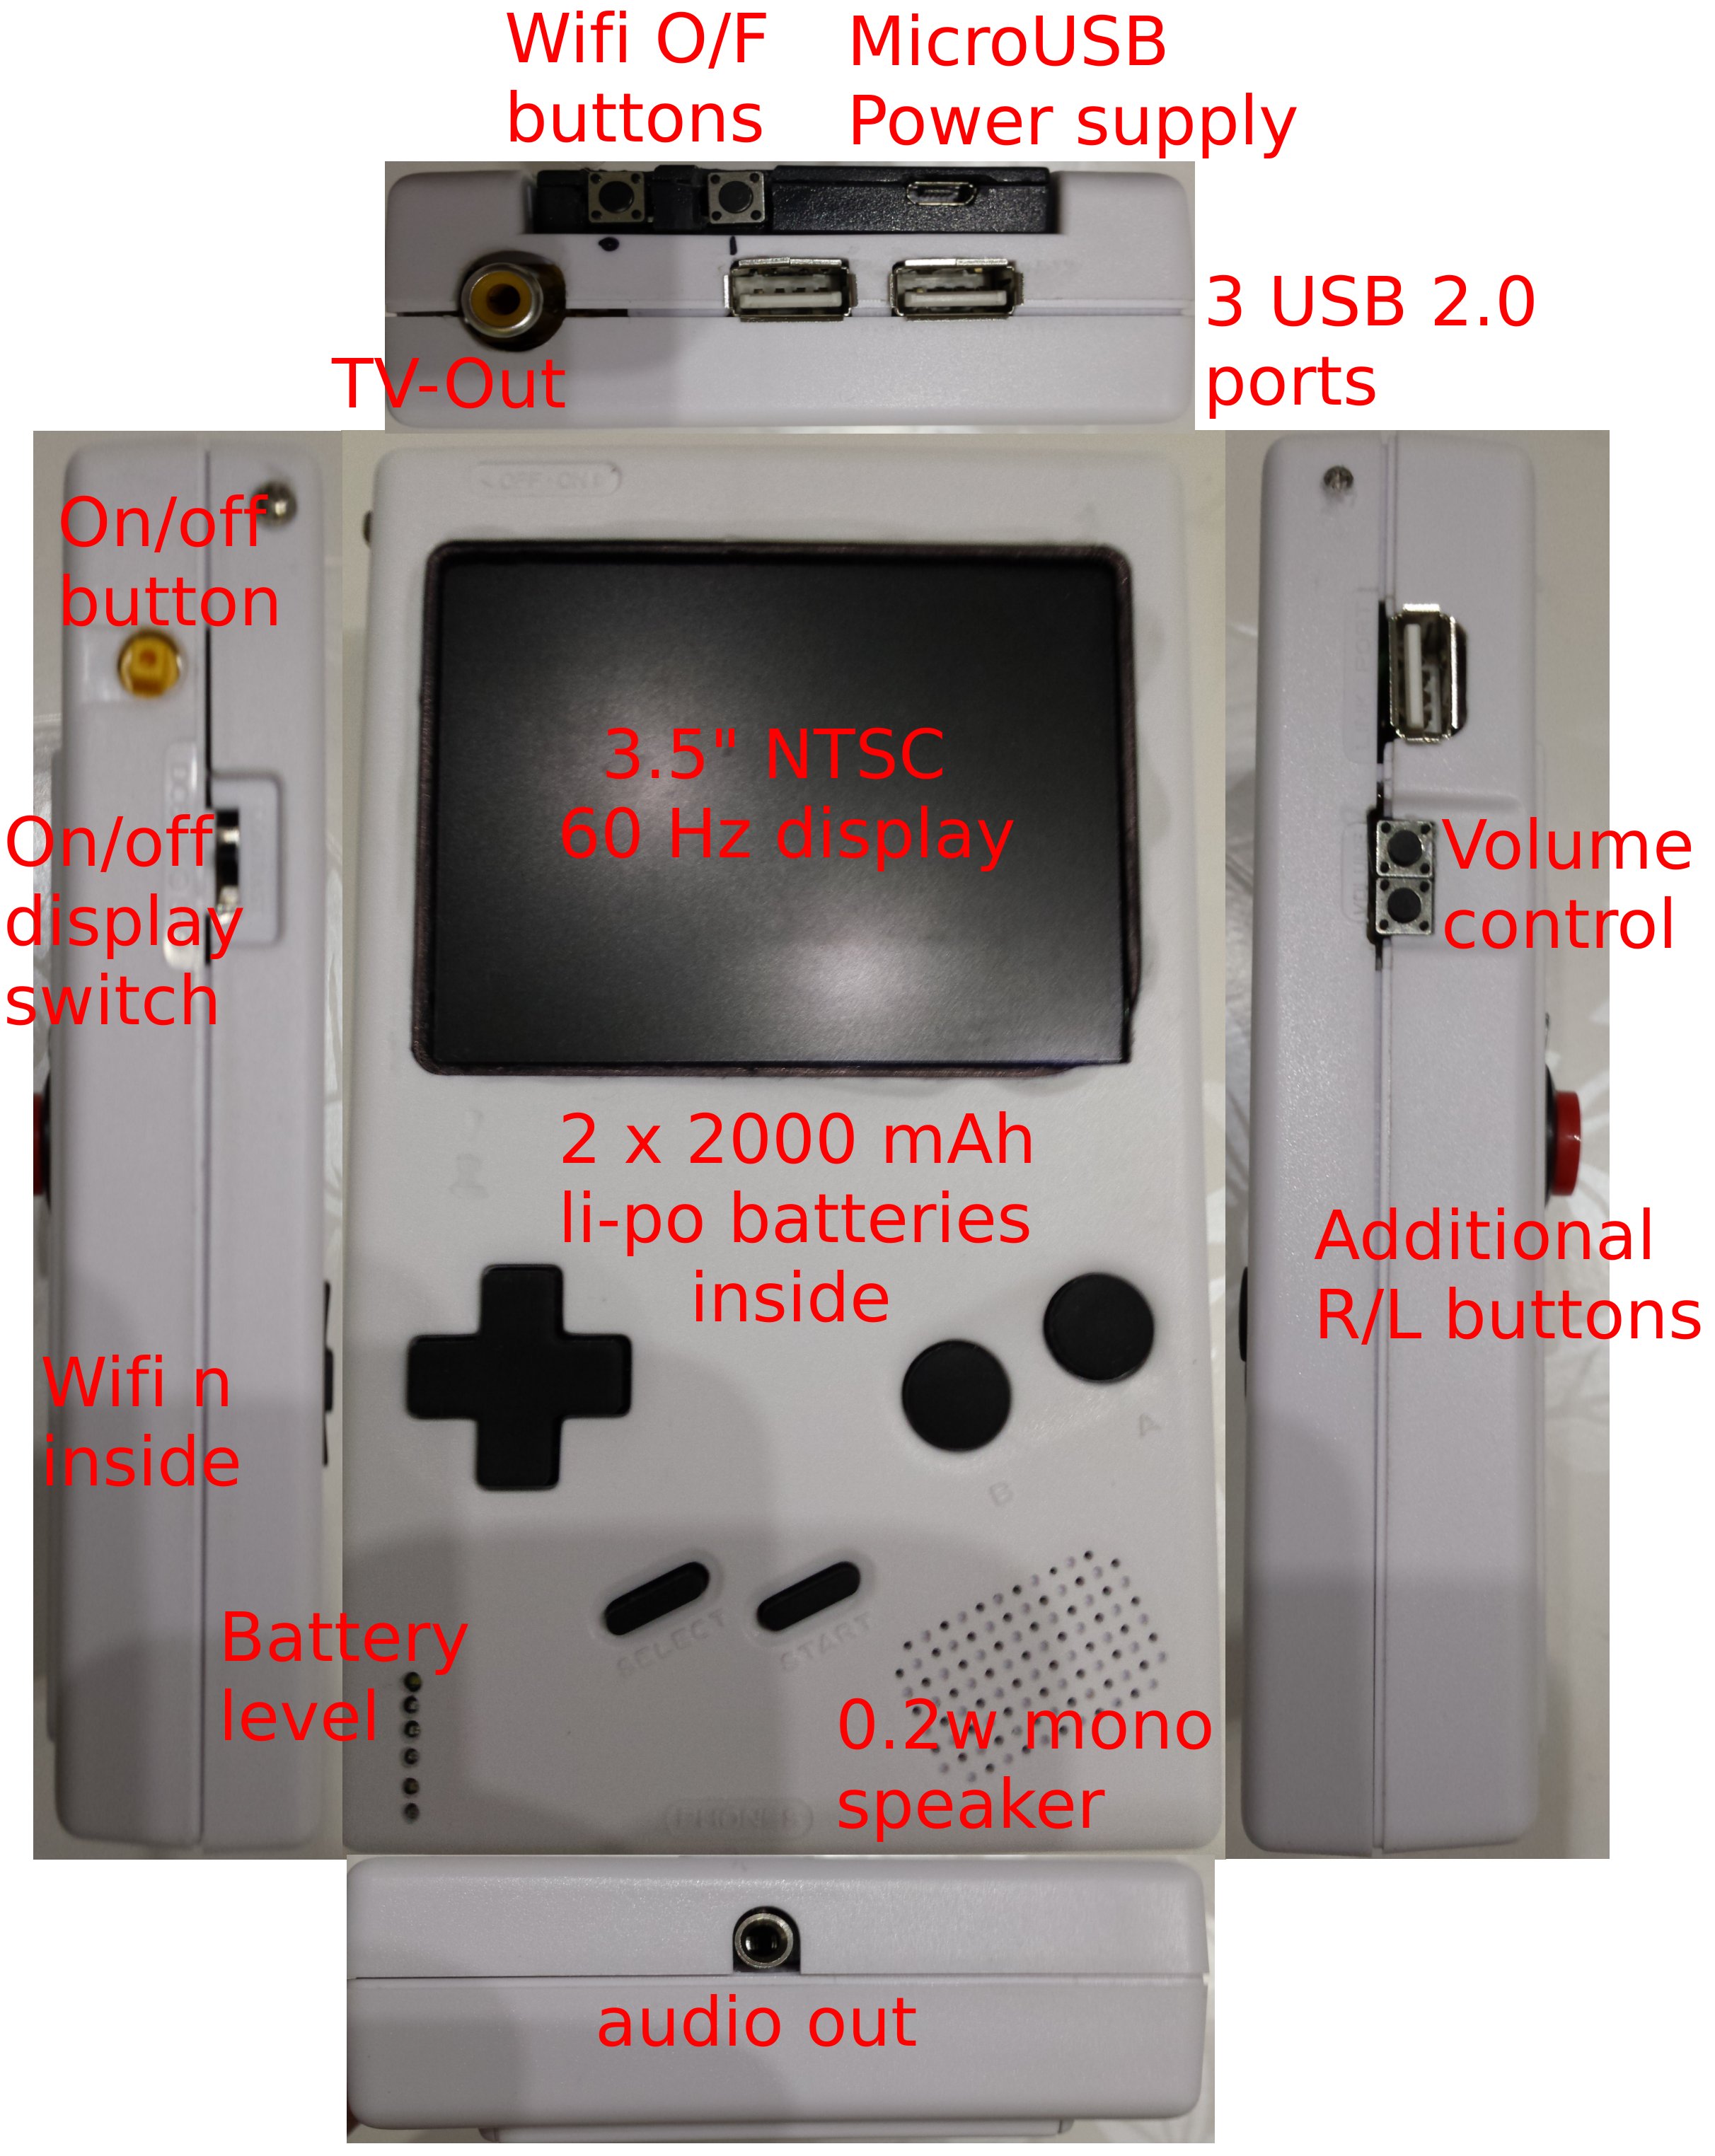 Hardware / Linux : Retro Boy - portable gaming console with an